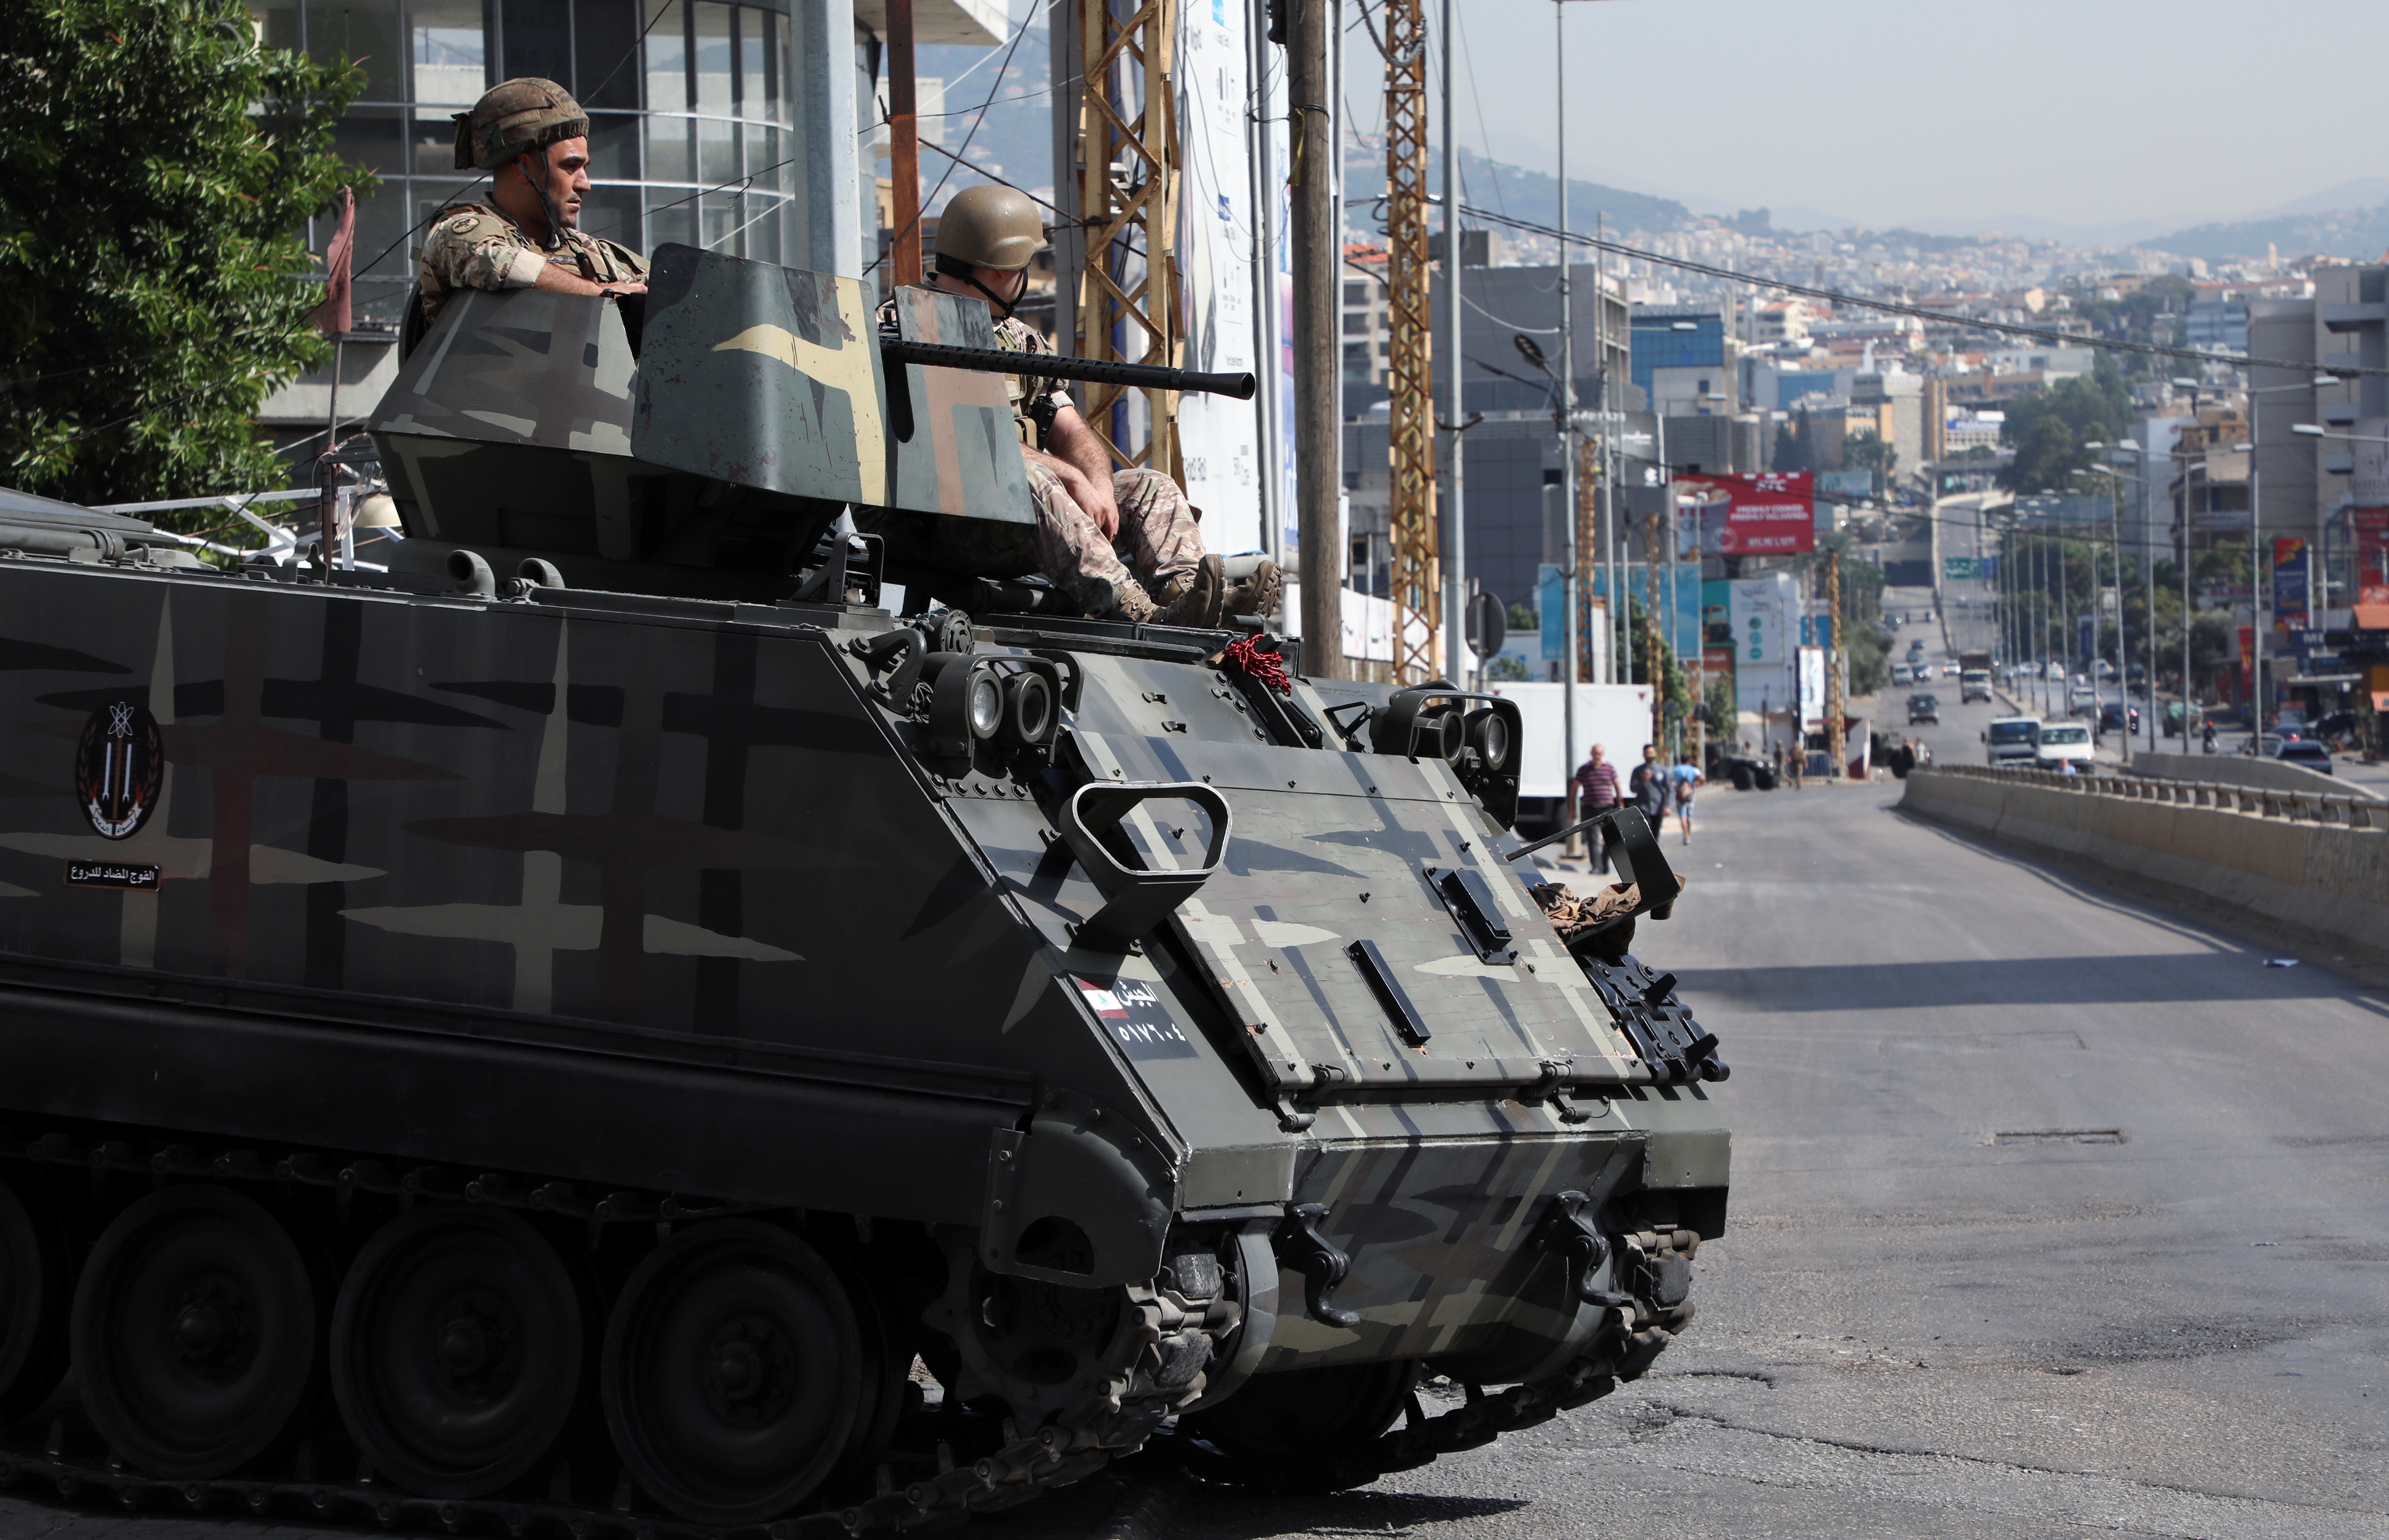 Army soldiers are deployed after gunfire erupted in Beirut